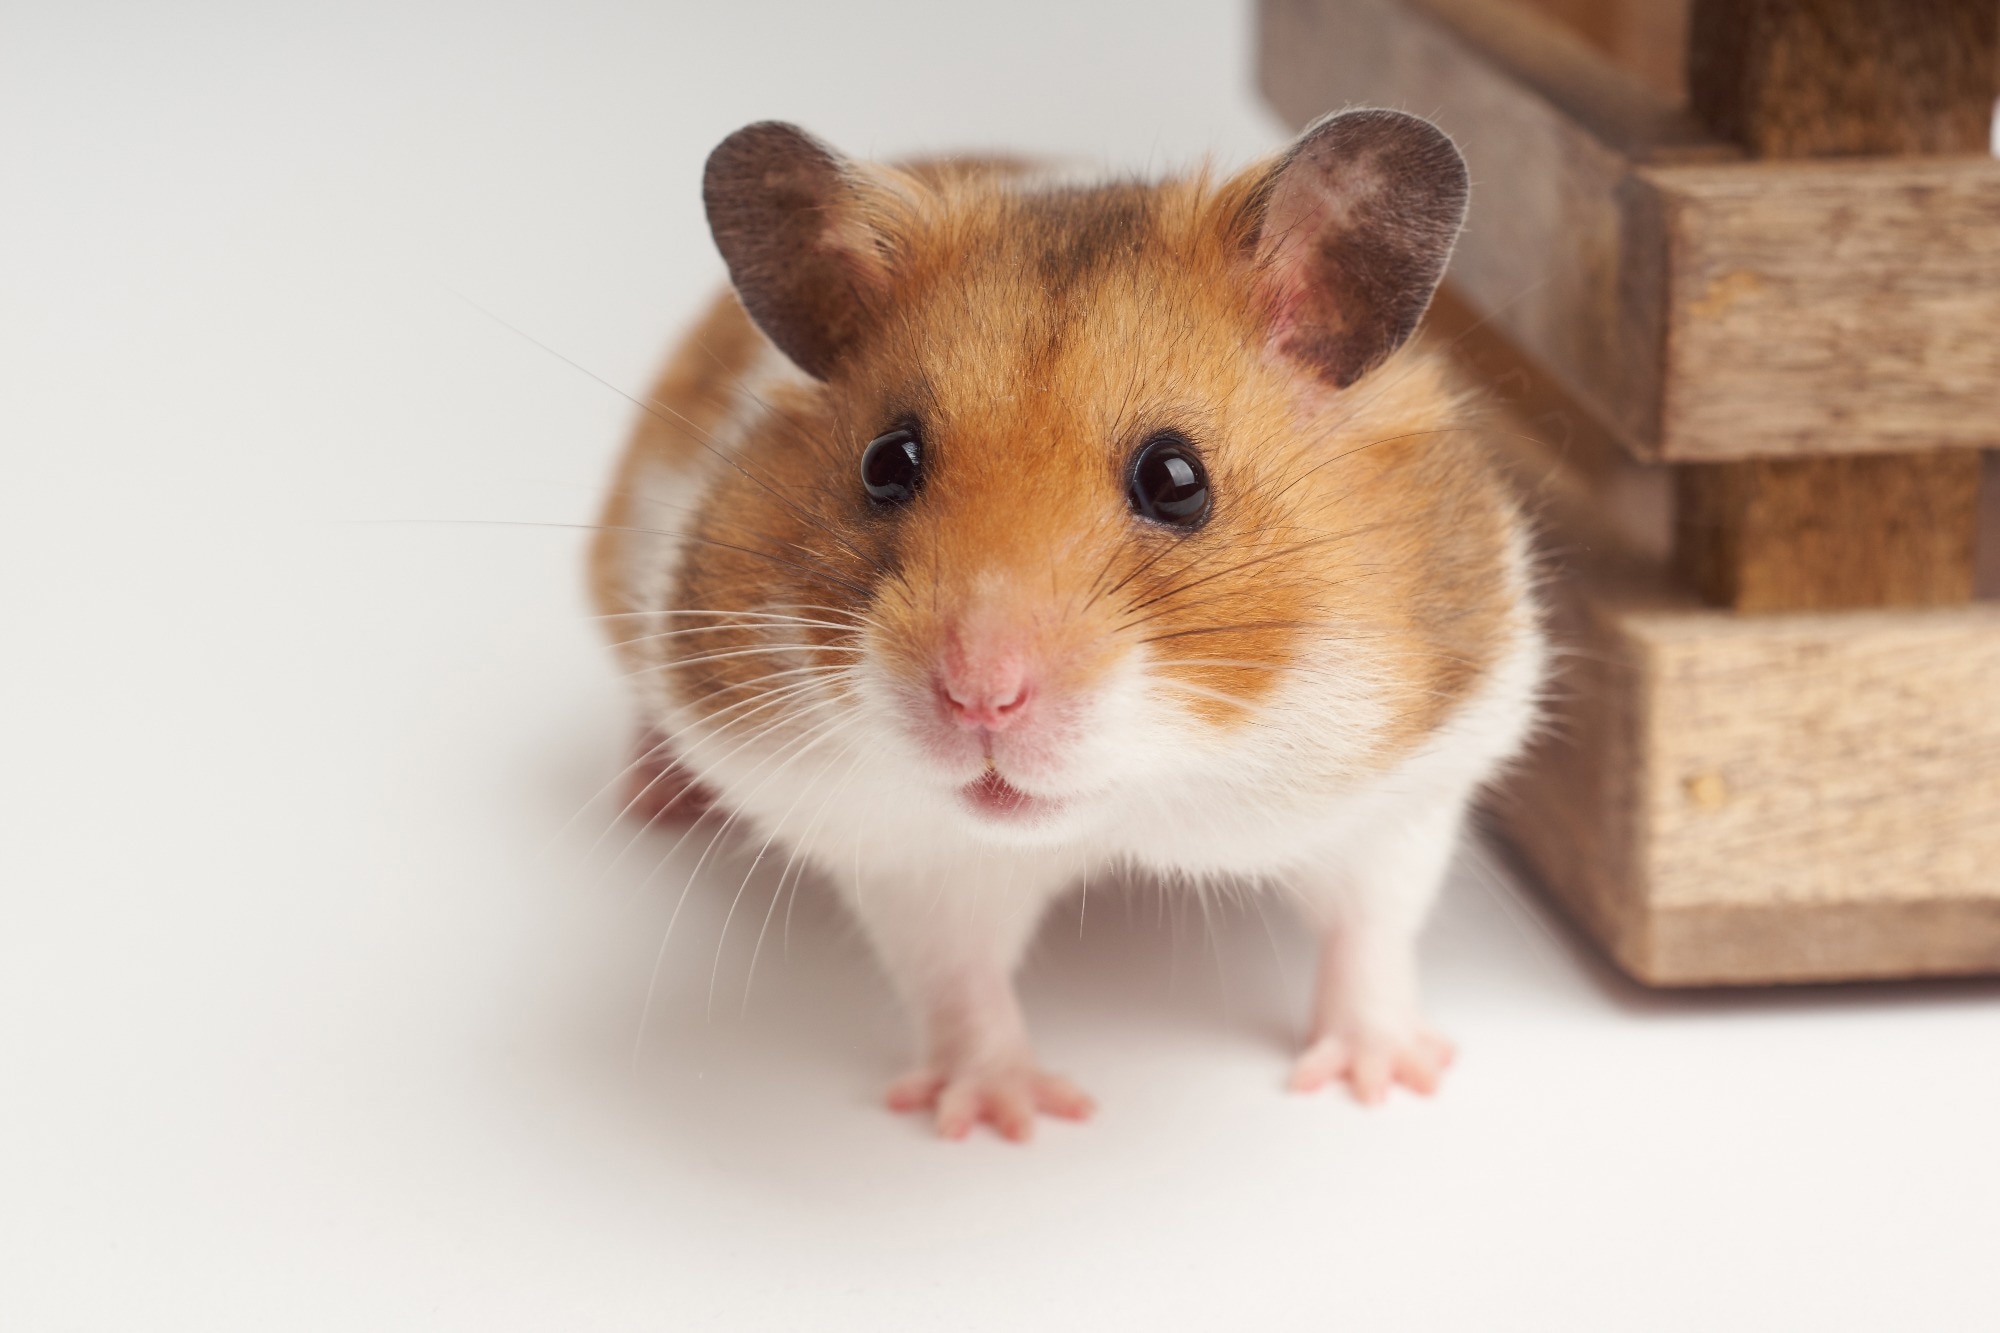 Study: A single-administration therapeutic interfering particle reduces SARS-CoV-2 viral shedding and pathogenesis in hamsters. Image Credit: Johannes Menge/Shutterstock